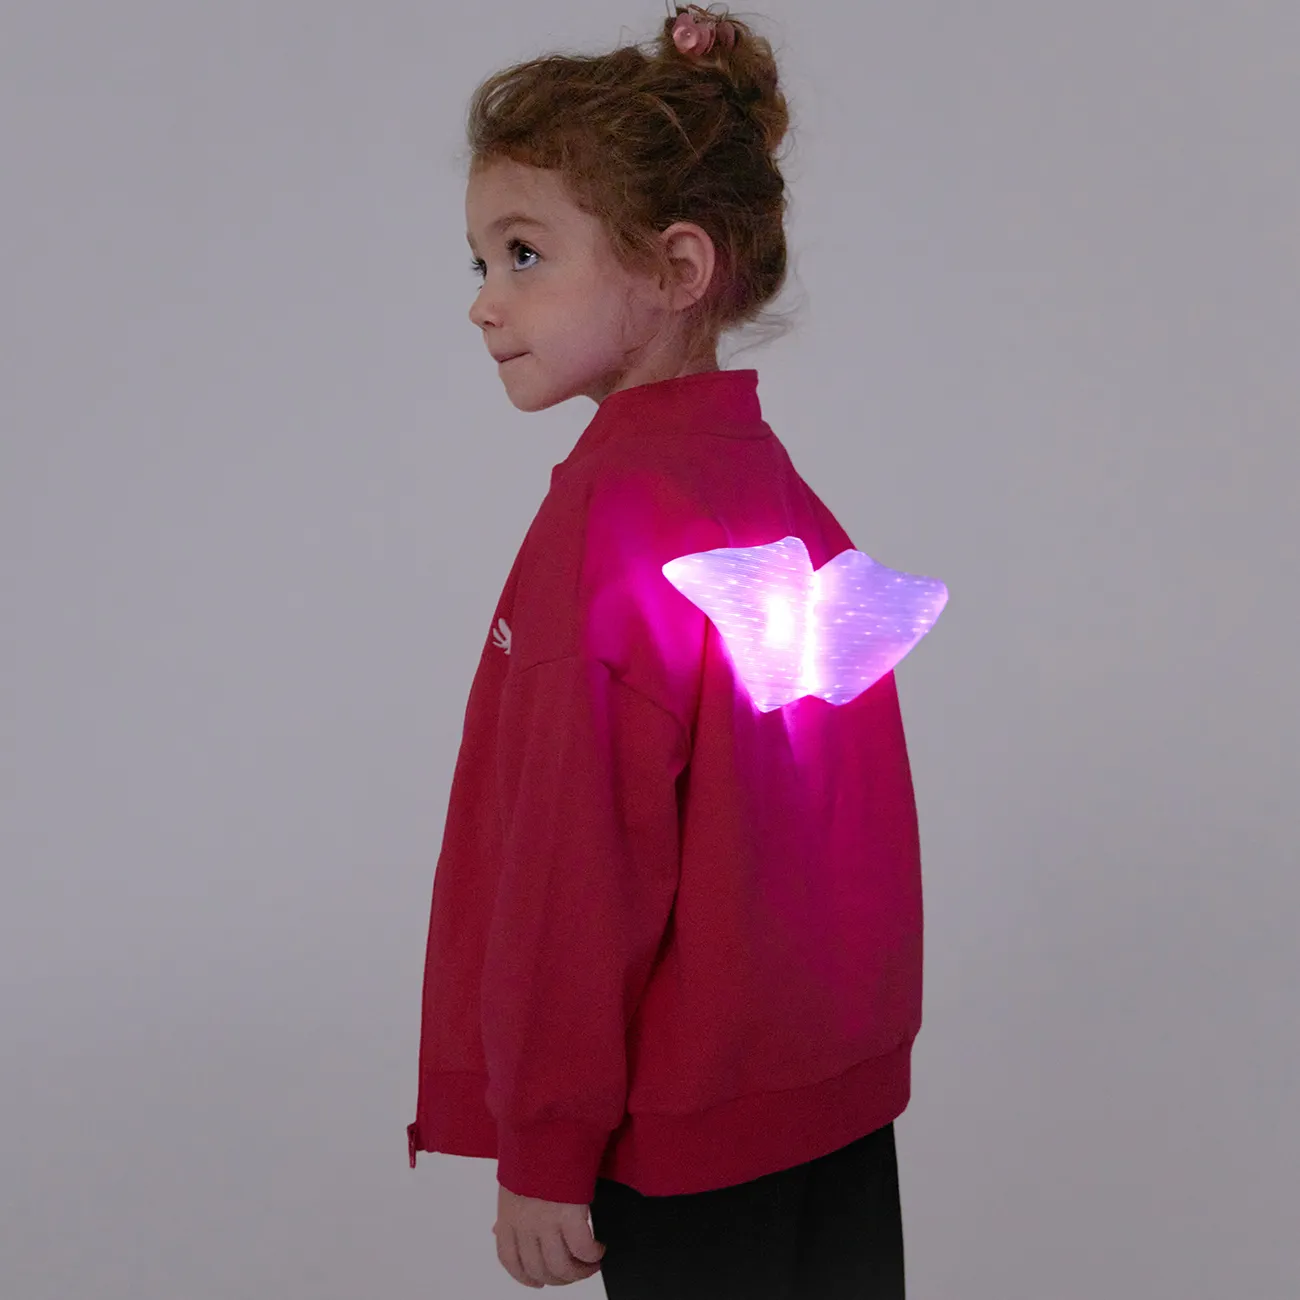 Go-Glow Illuminating Jacket with Light Up Wings Including Controller (Built-In Battery) Hot Pink big image 1